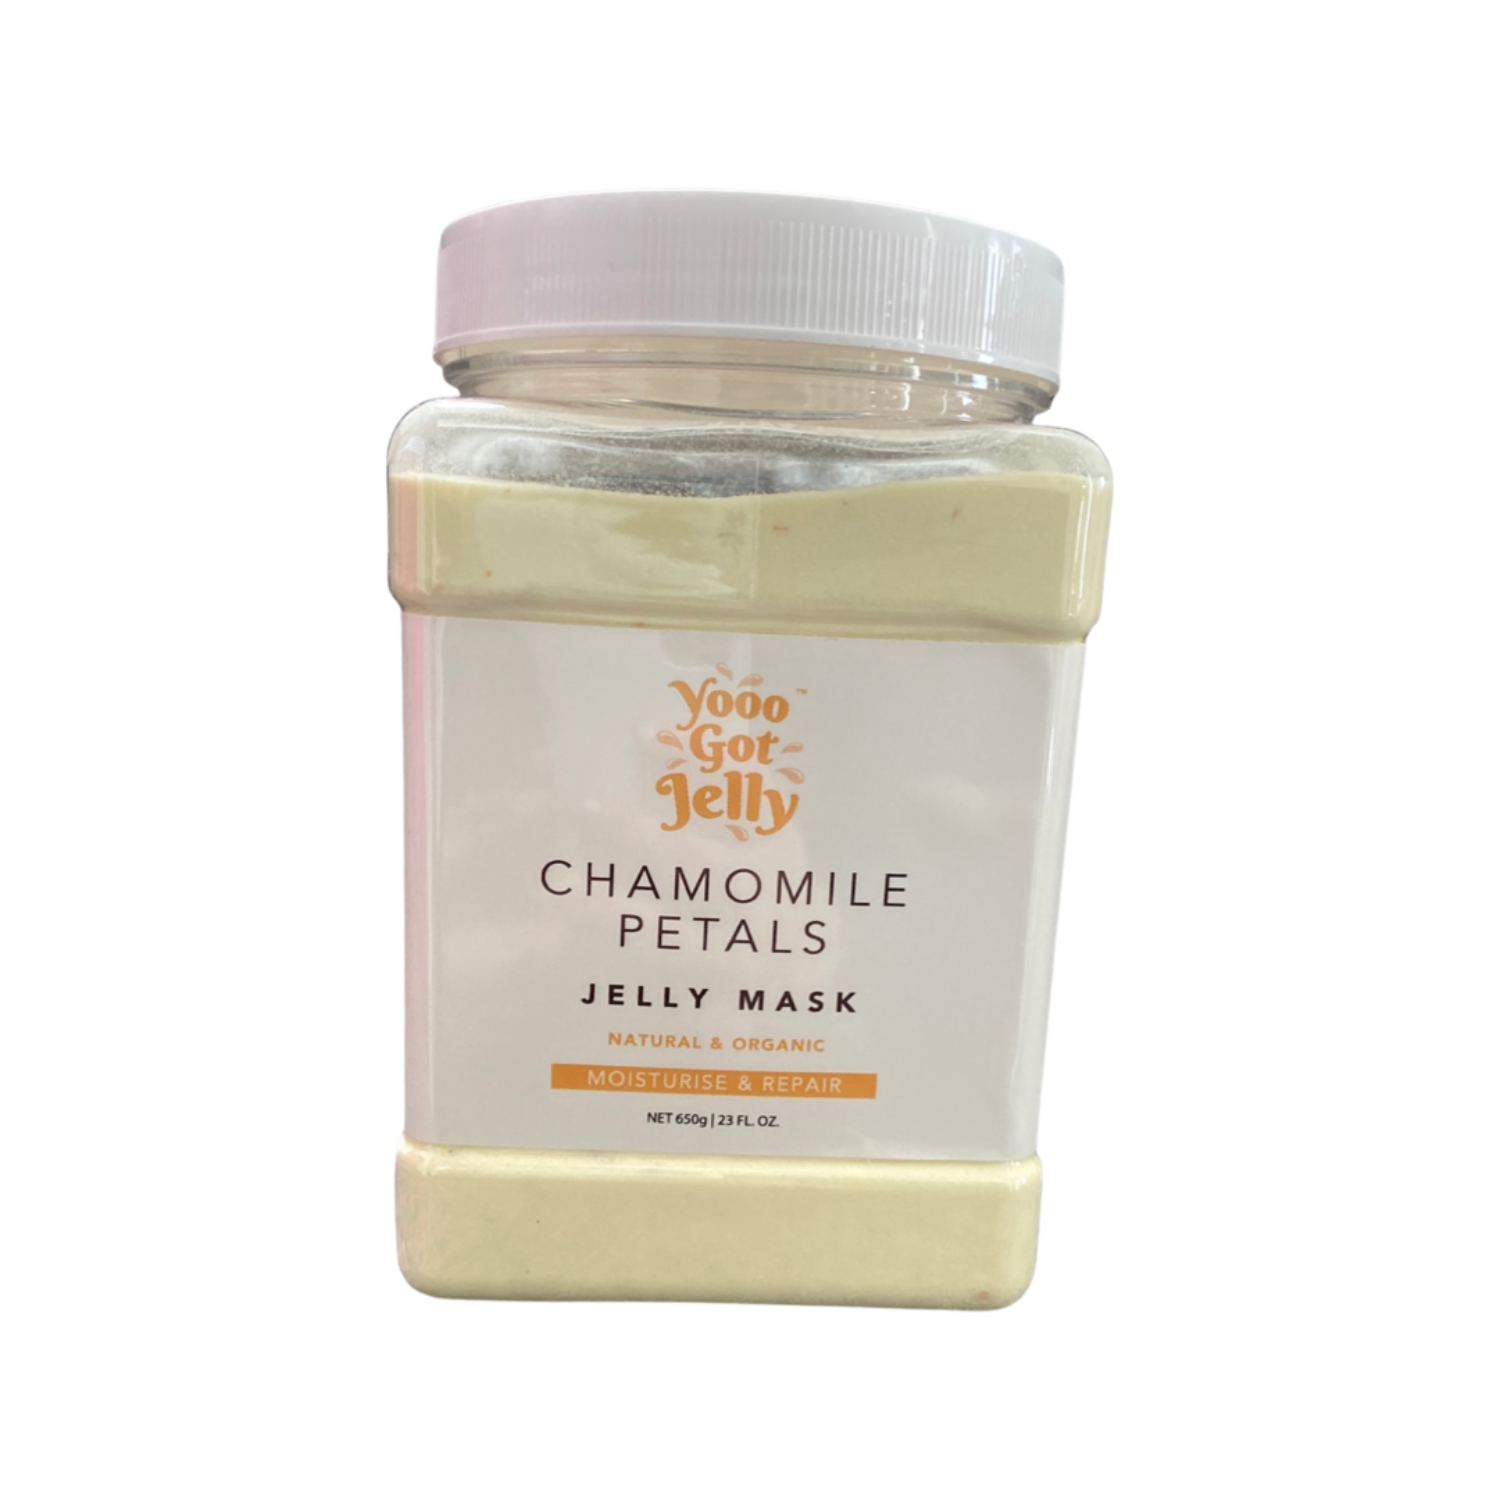 CHAMOMILE PETALS JELLY MASK - Moisturise and Repair